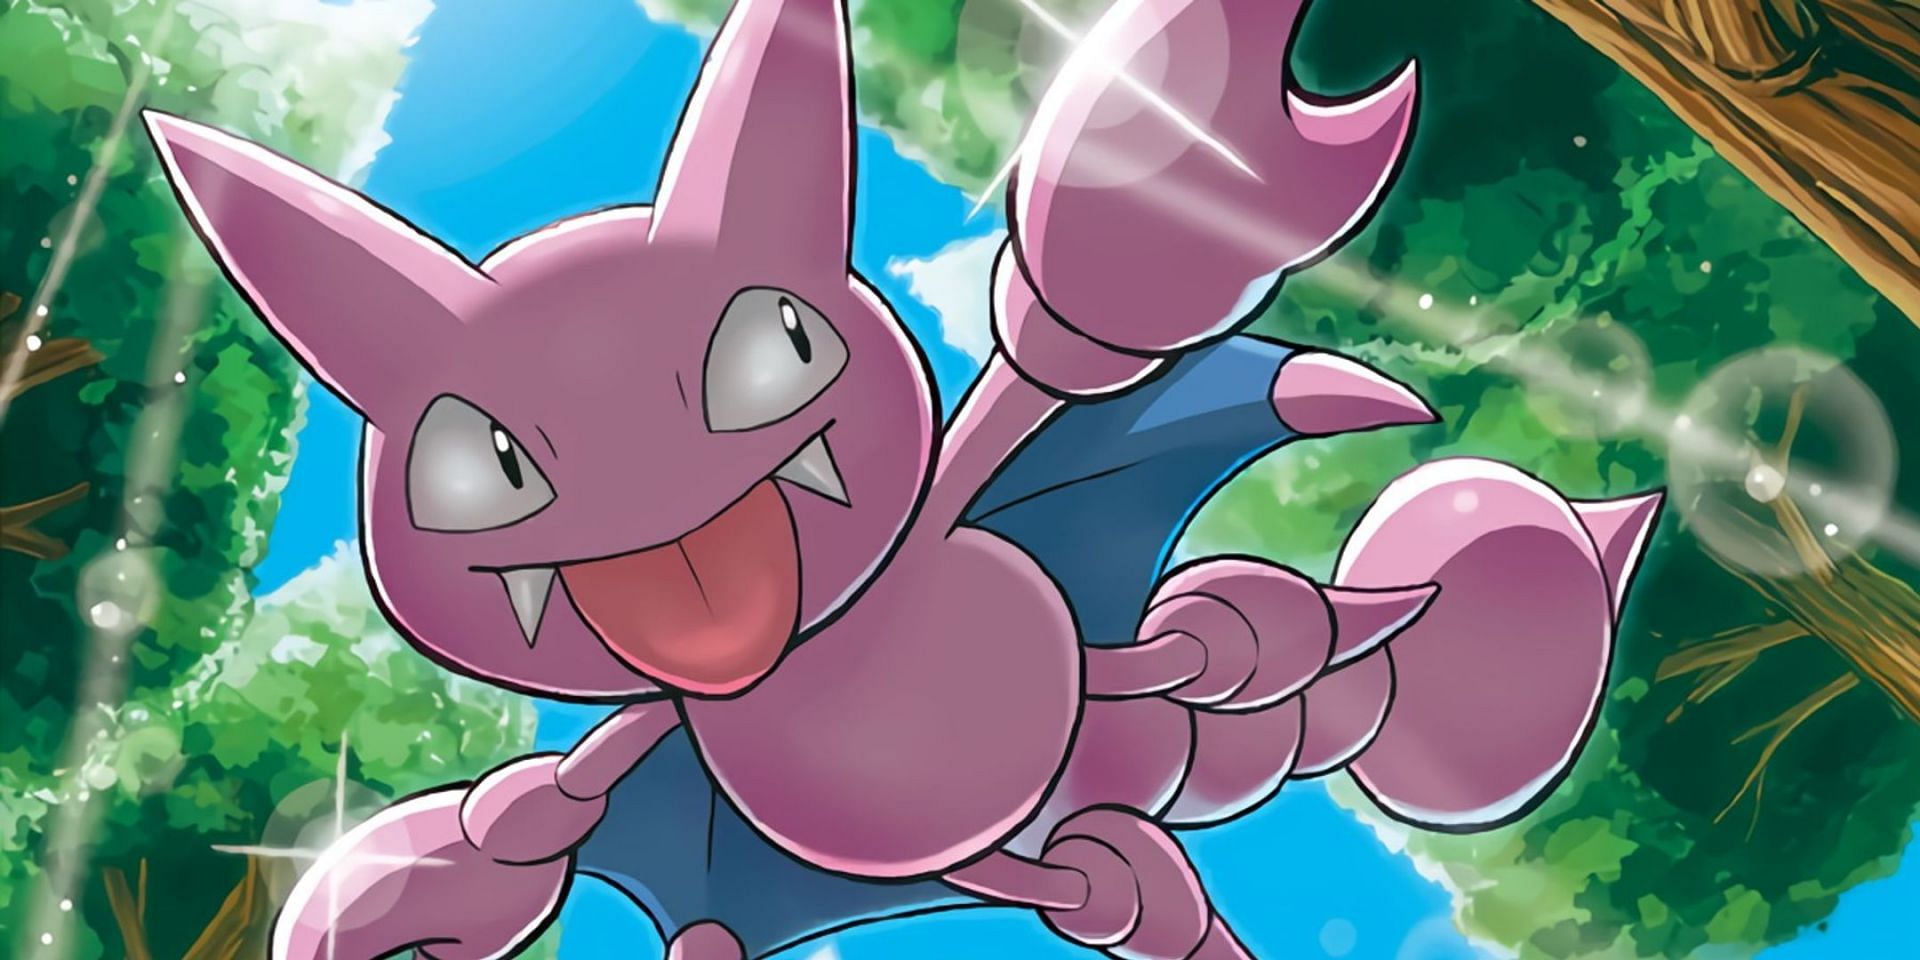 Gligar as it appears in the trading card game (Image via The Pokemon Company)